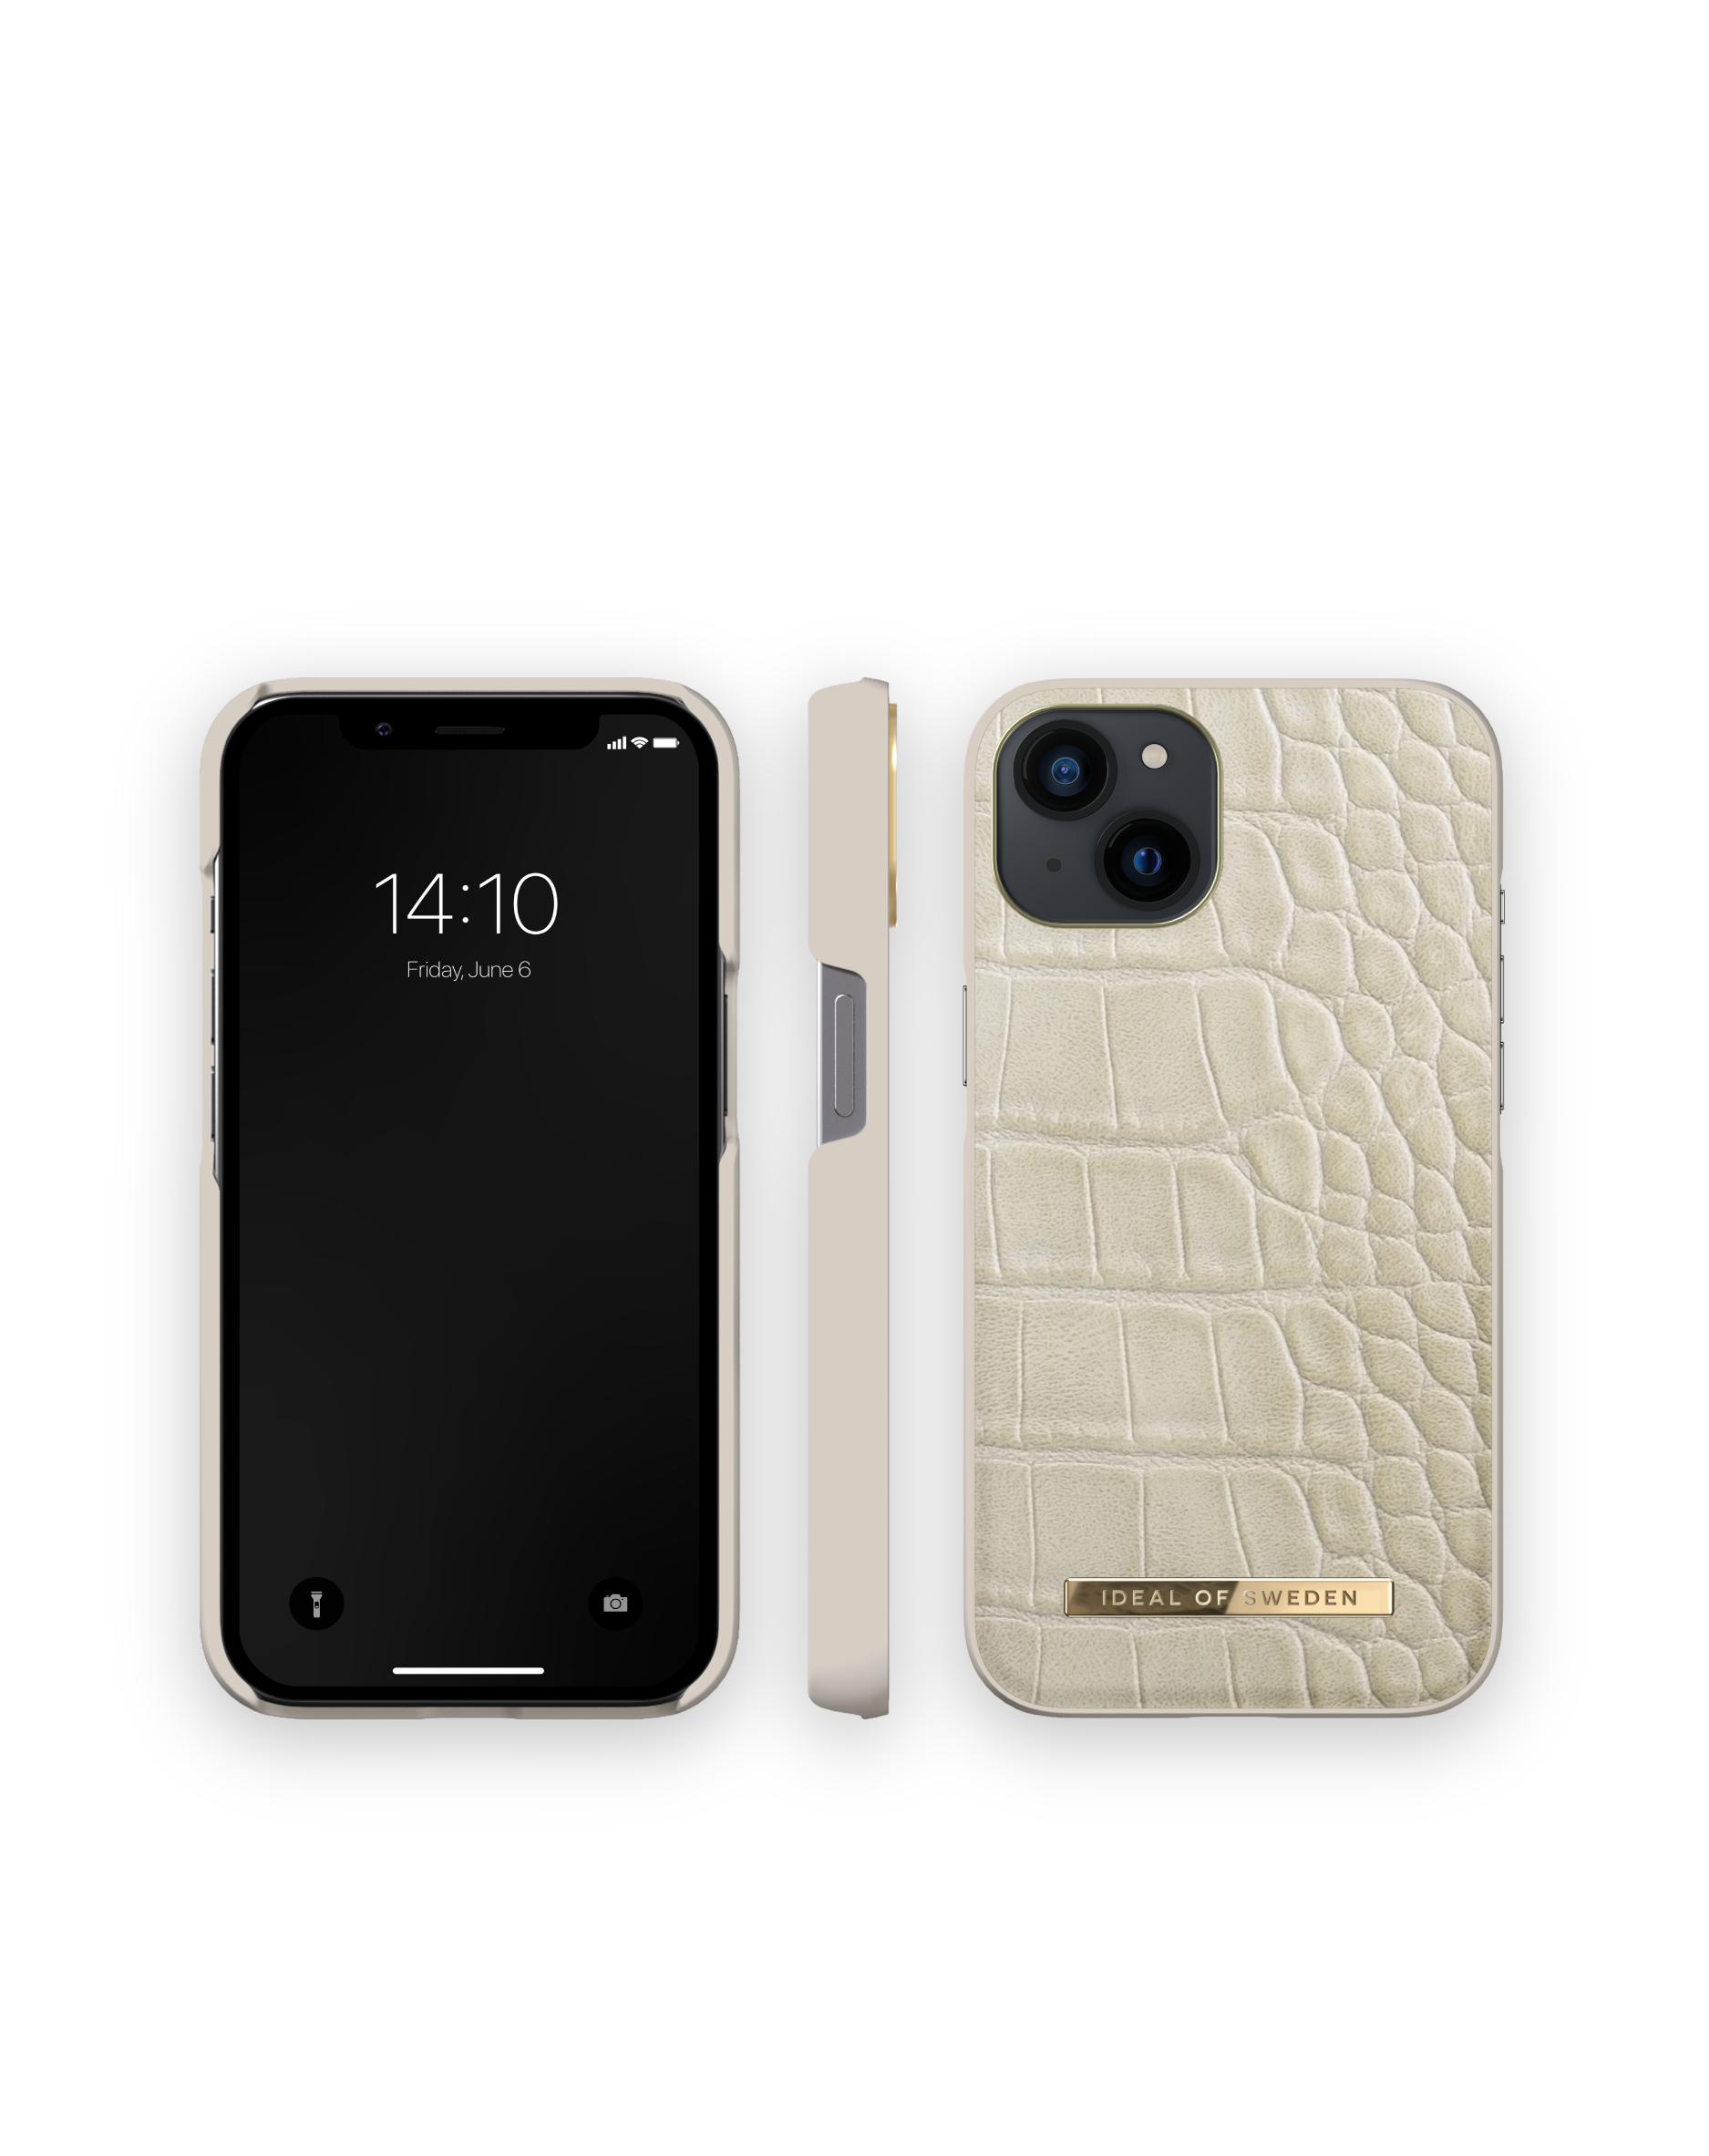 IDEAL OF SWEDEN IDACAW20-I2161-243, Backcover, iPhone Caramel Apple, Croco 13